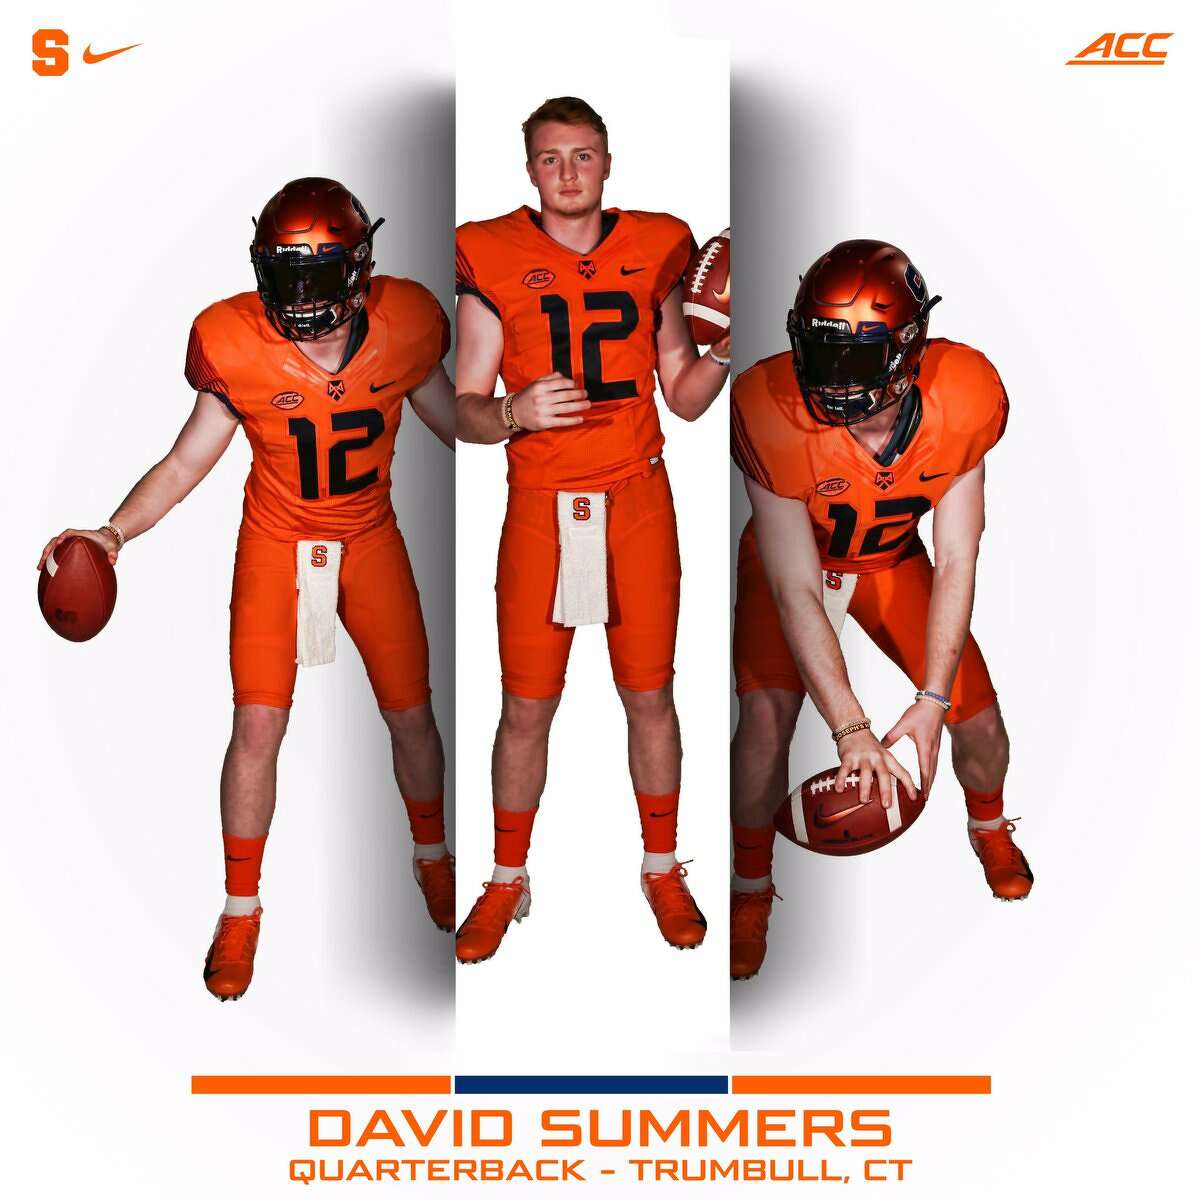 Syracuse signing card for St. Joesph QB David Summers on National Signing Day